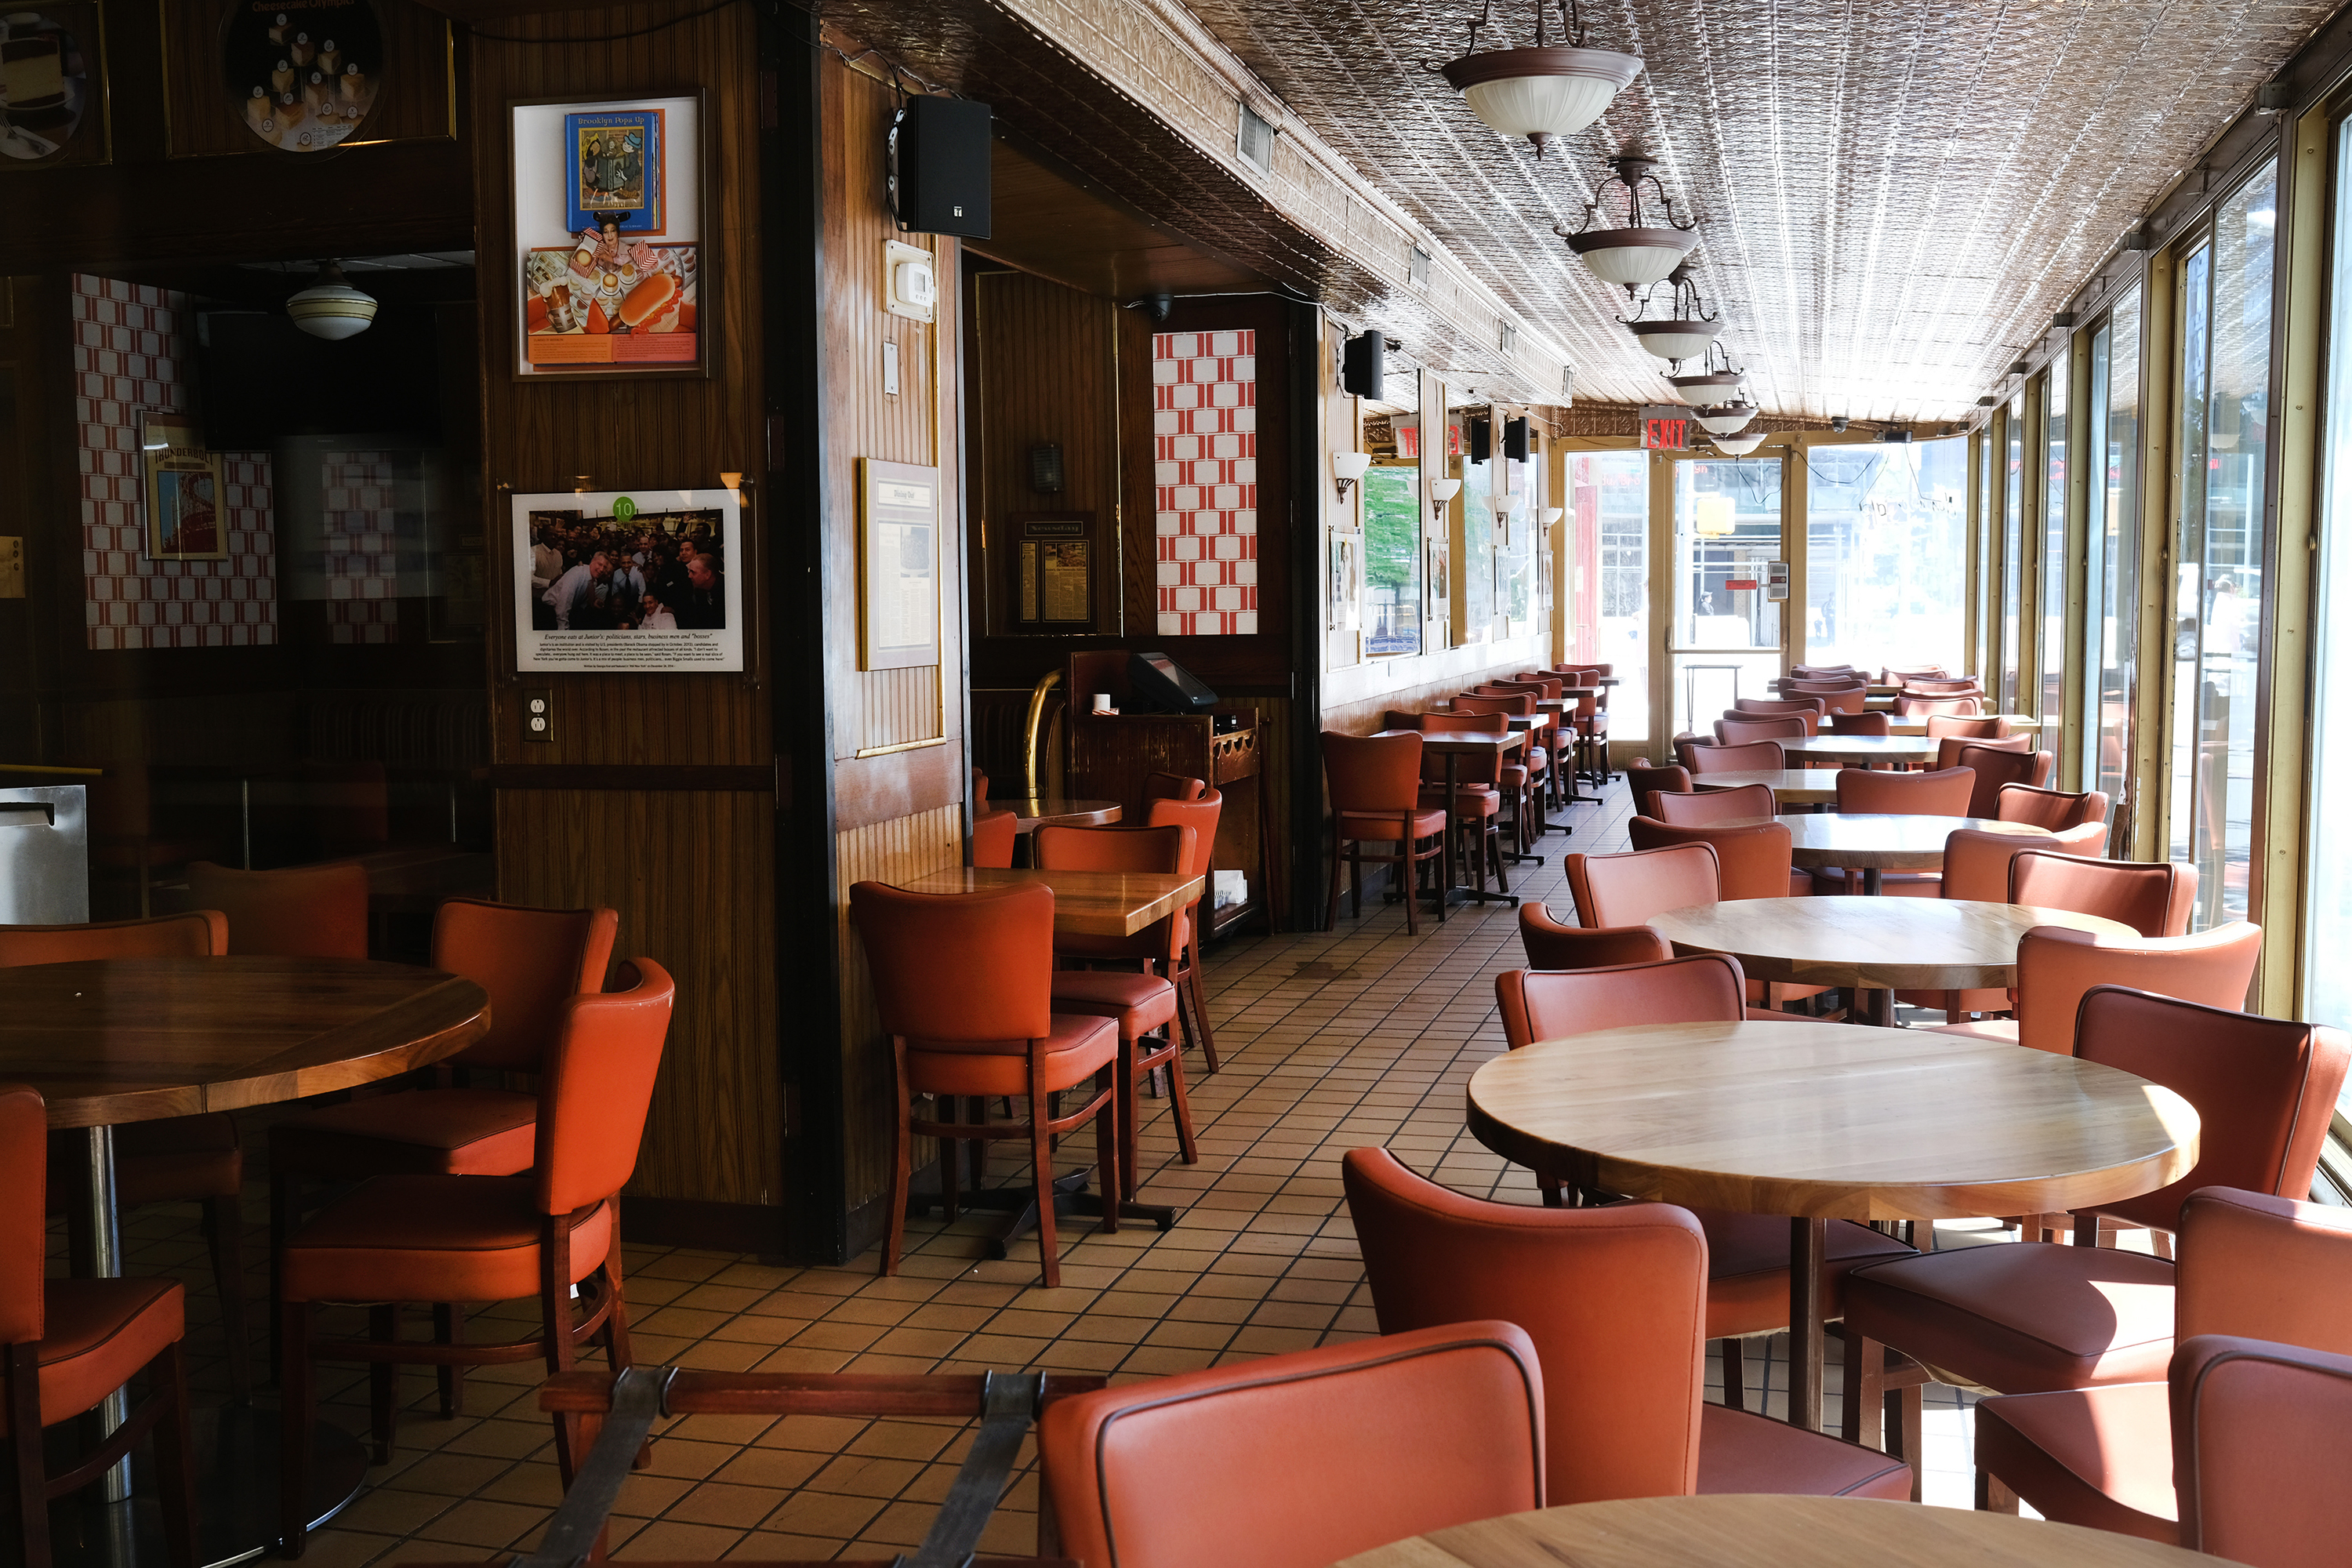 A restaurant stands empty and closed in Brooklyn on May 12, in New York City. 